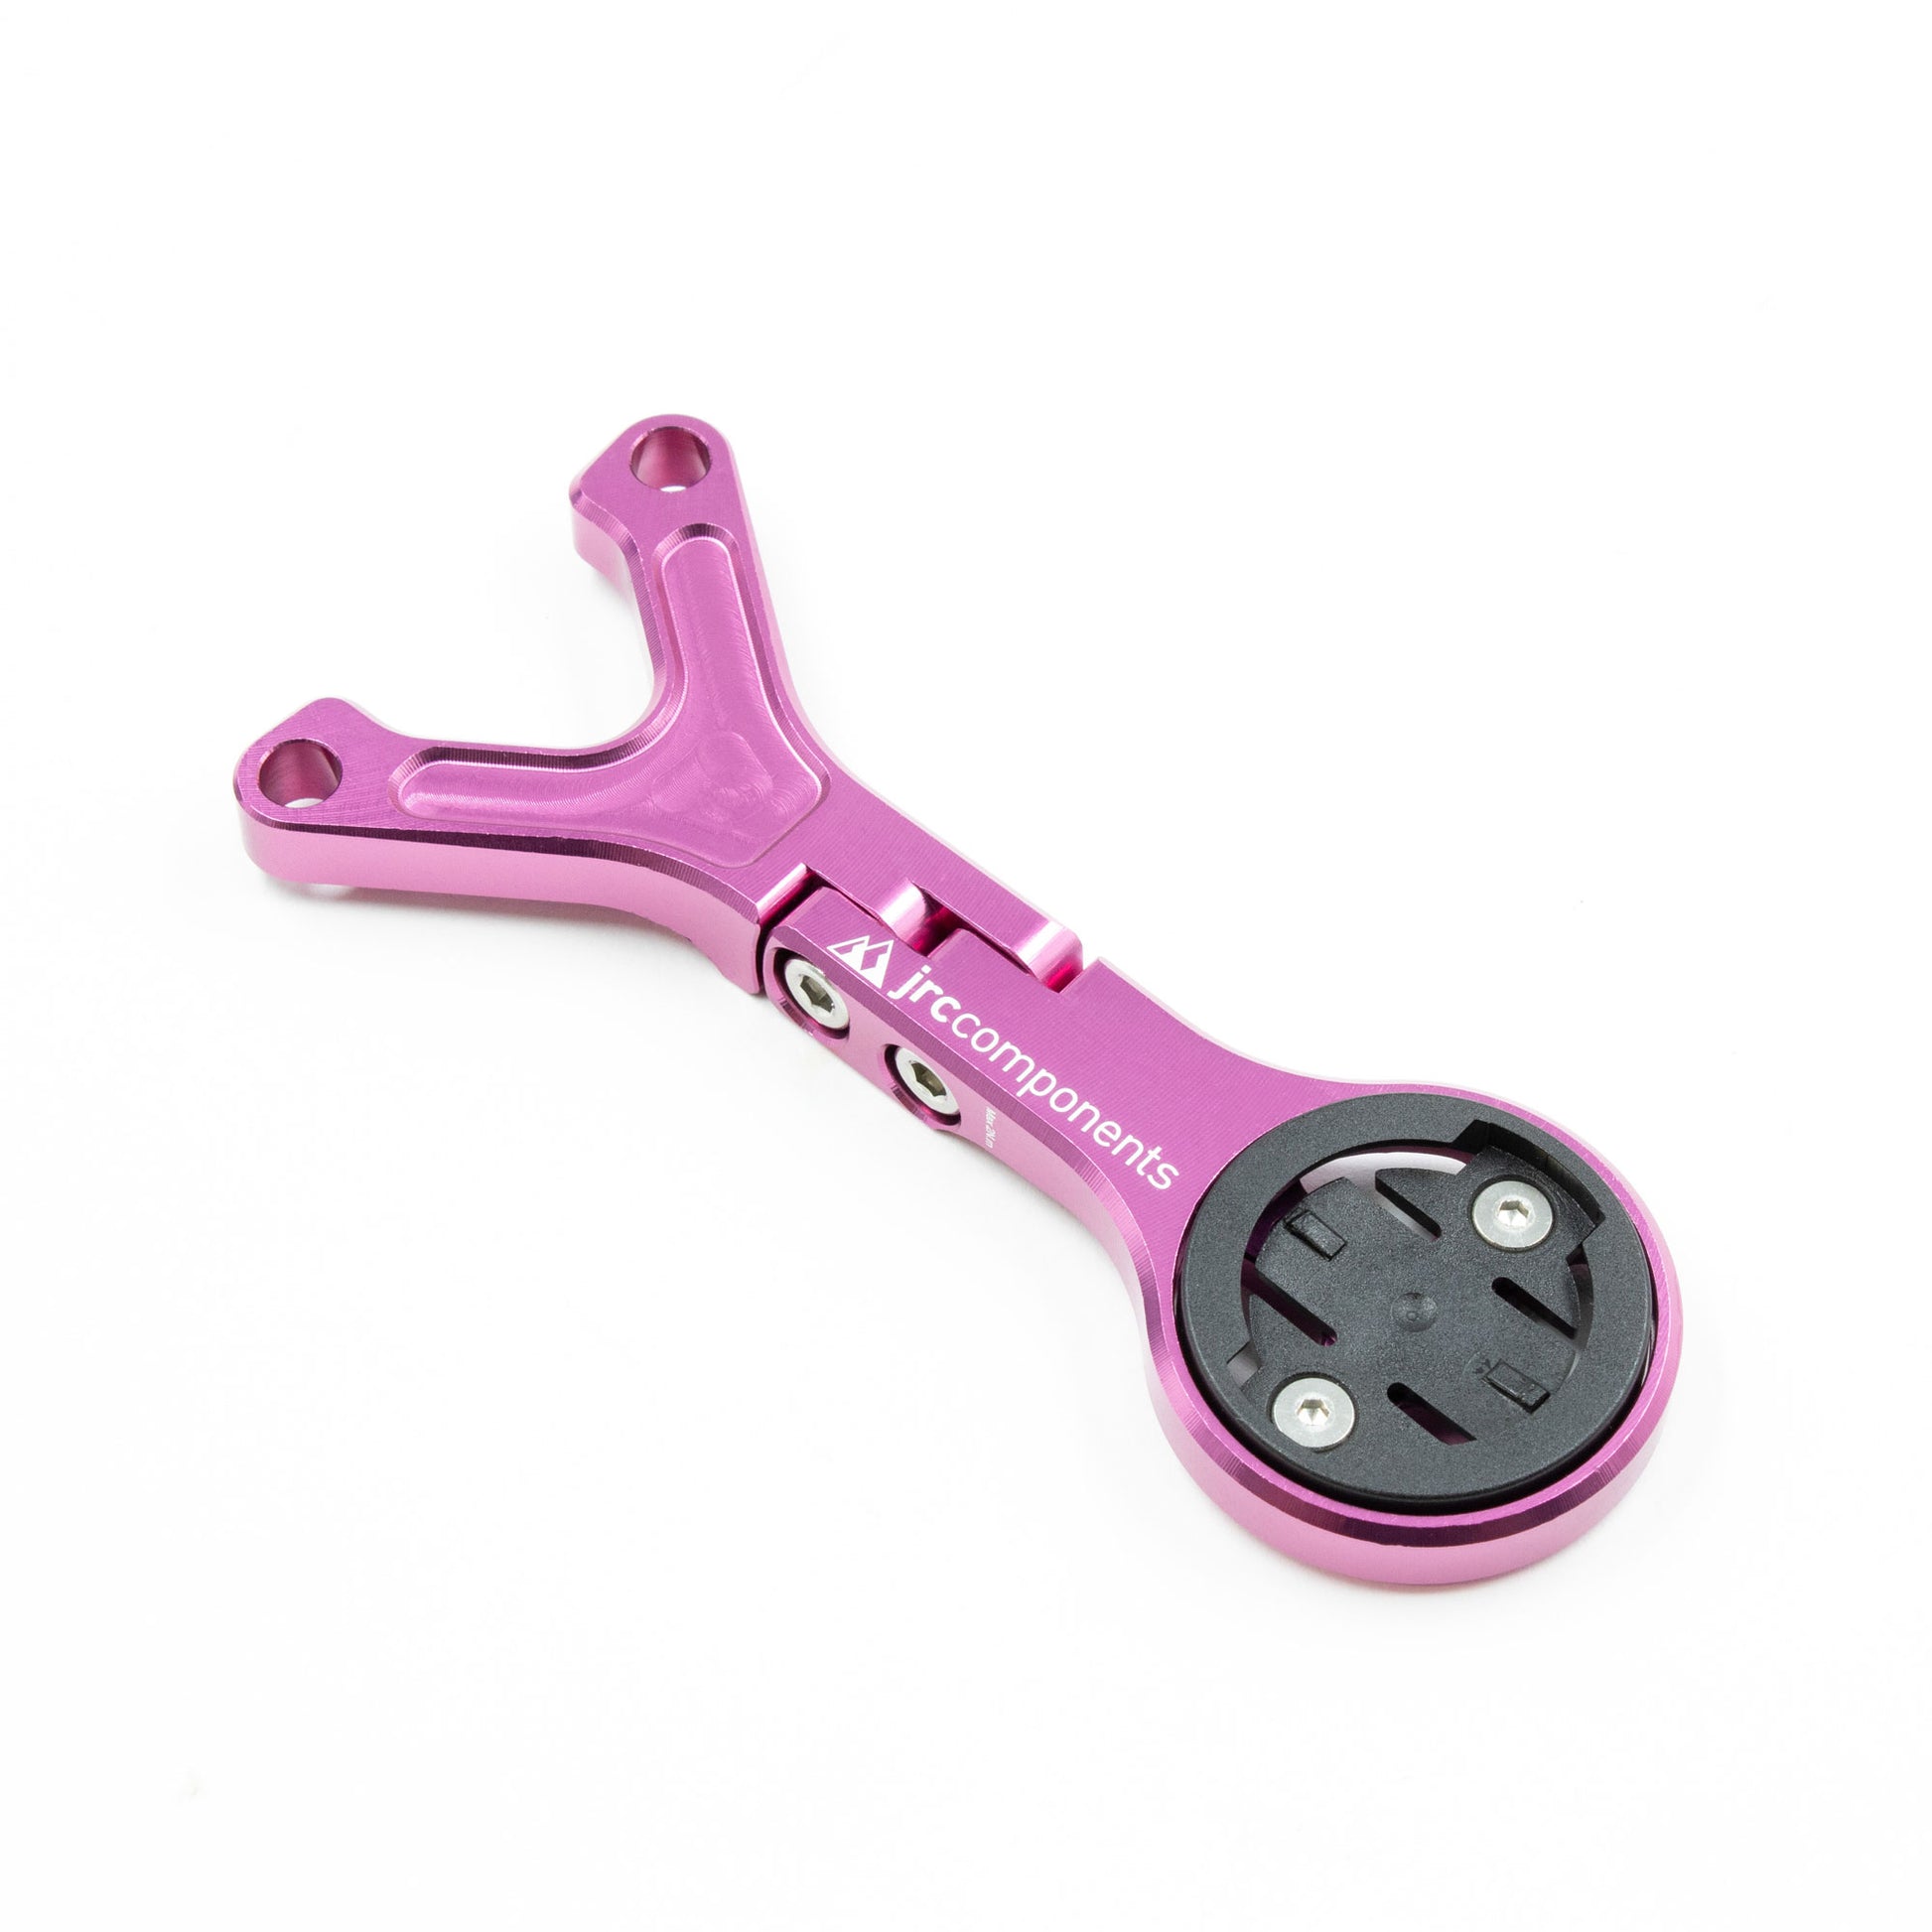 JRC Components, Lightweight Underbar Out Front Mount GPS Computer Mount for Cannondale Hollowgram Knot and Save Handlebar and Stem System for Wahoo in Pink